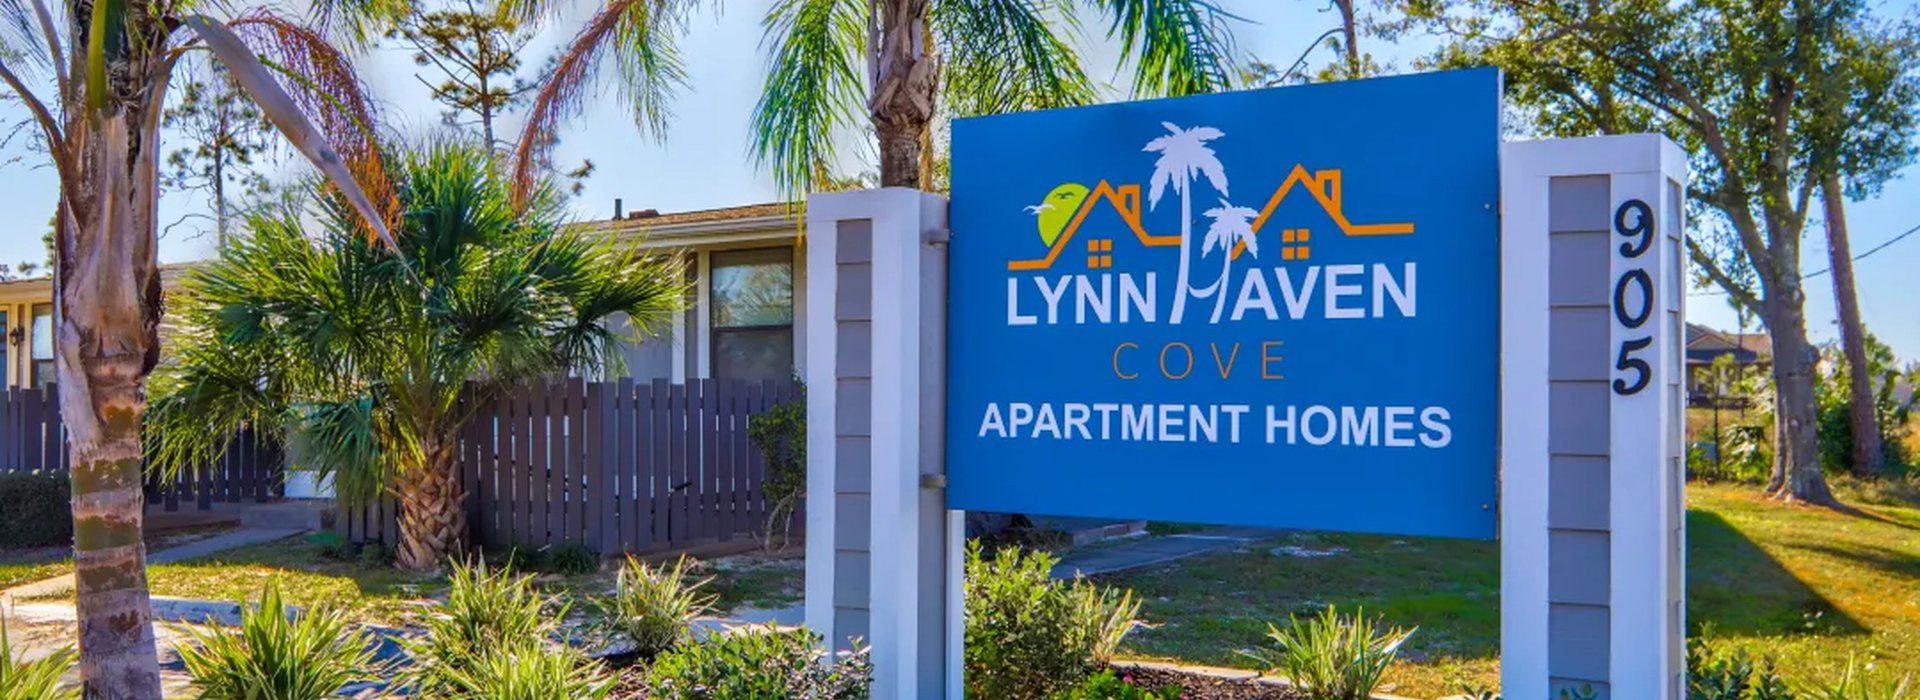 entrance sign in Lynn Haven, Florida on the Lynn Haven Cove property